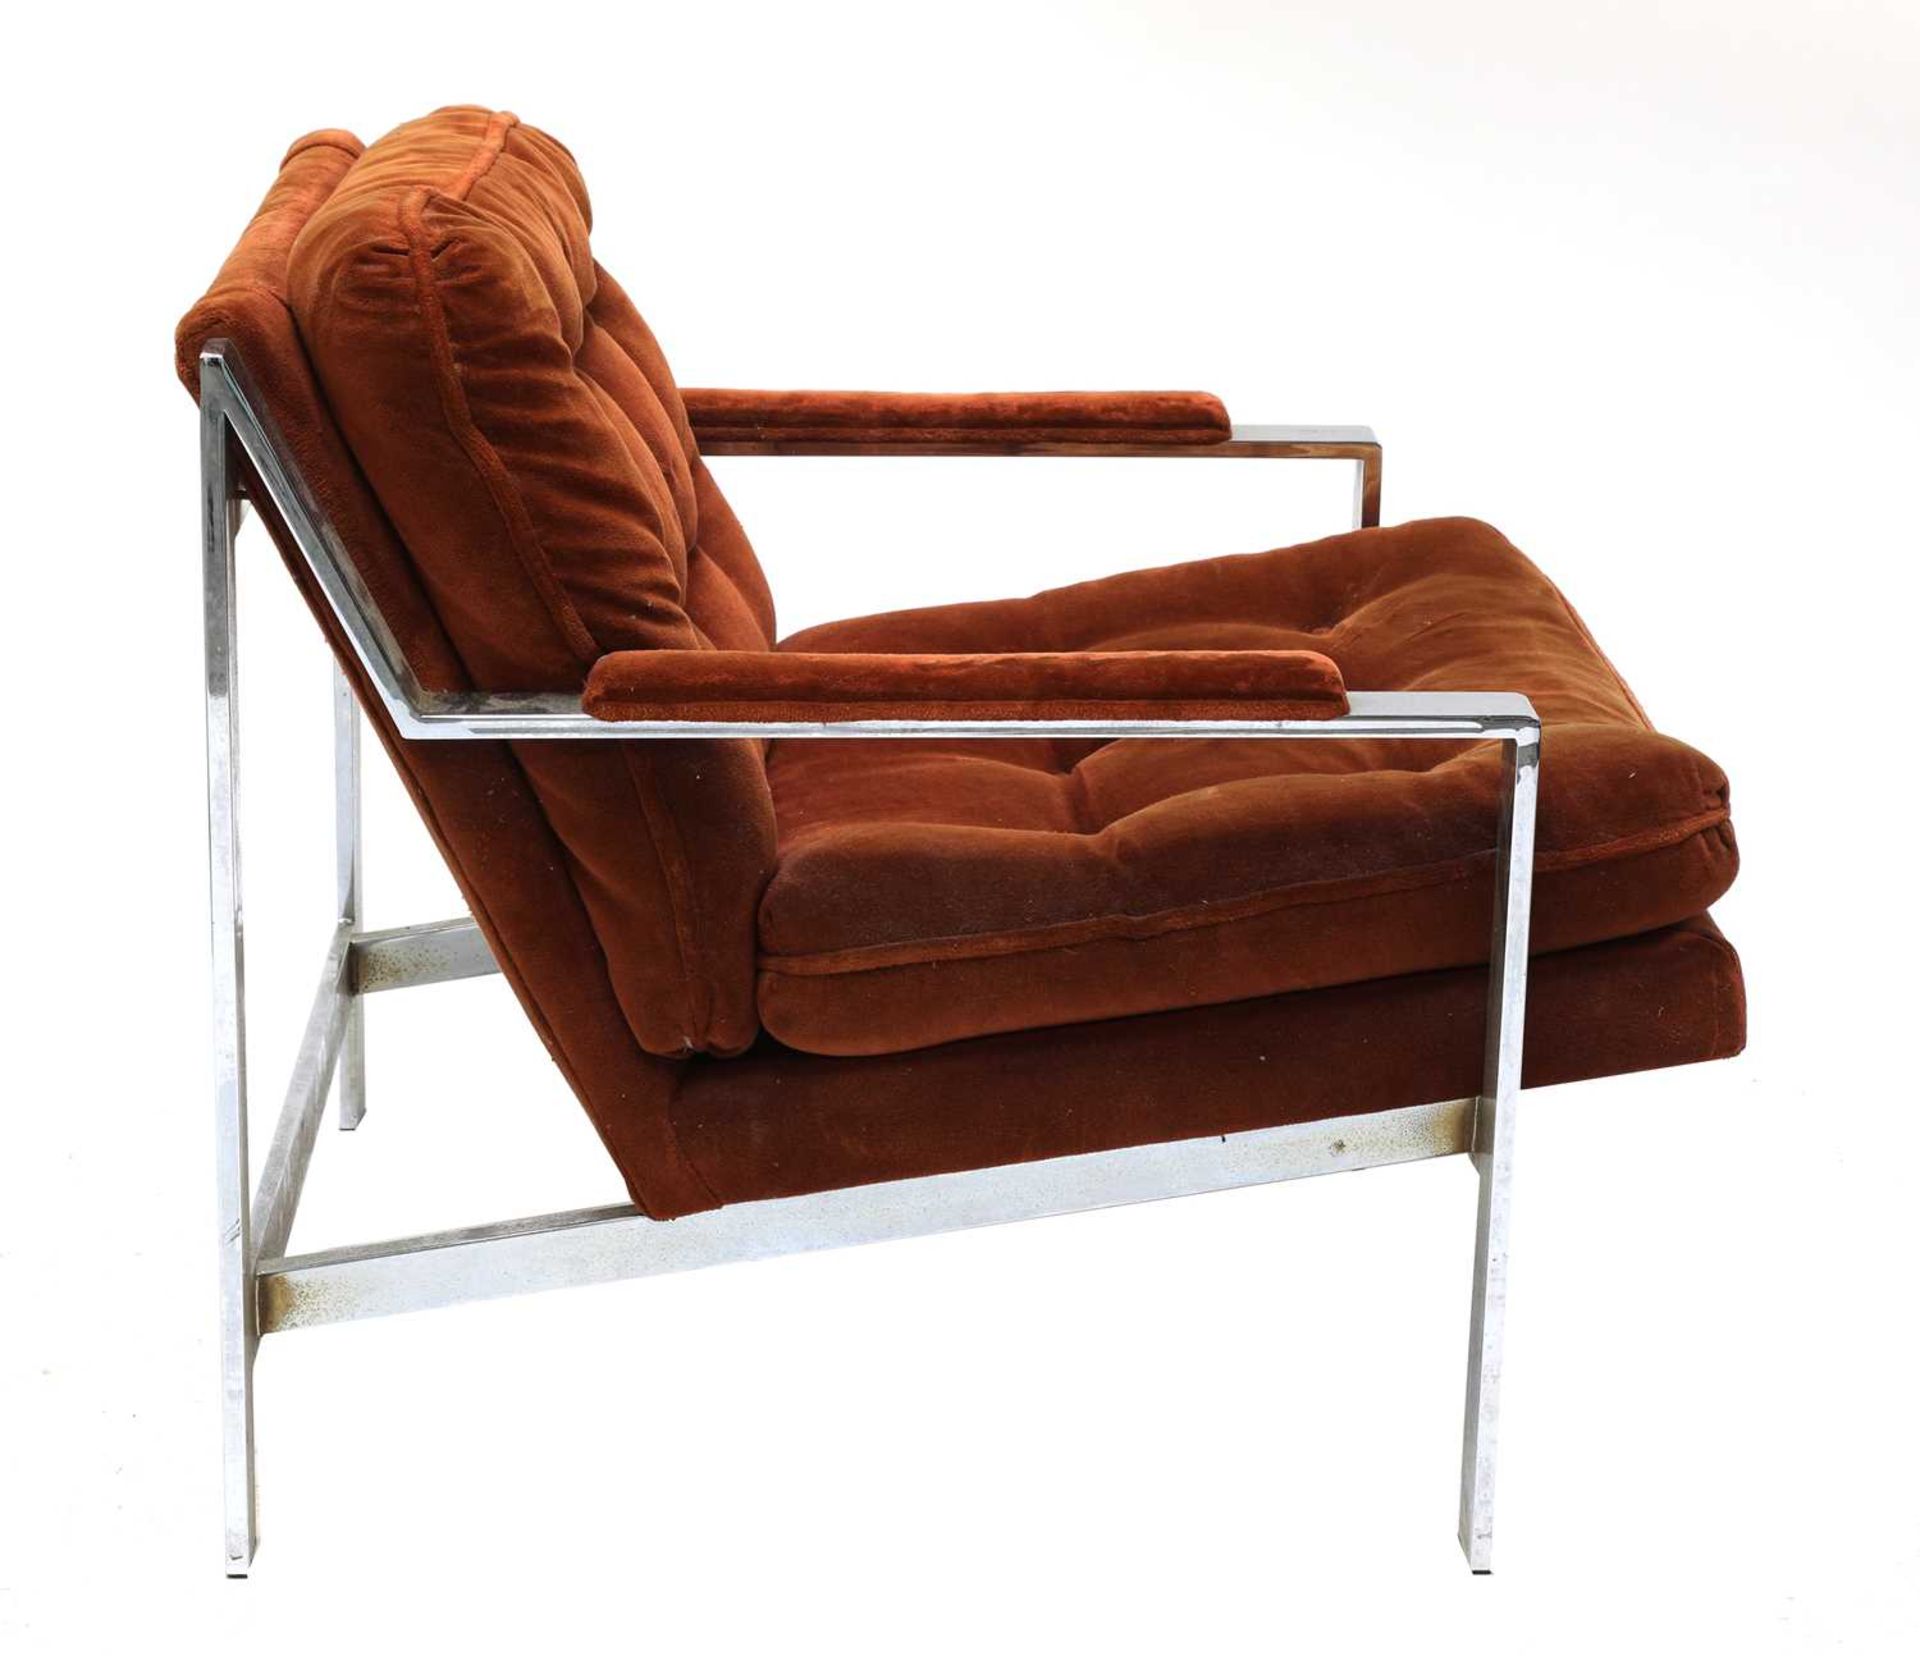 A chrome and ginger upholstered armchair, - Image 2 of 2